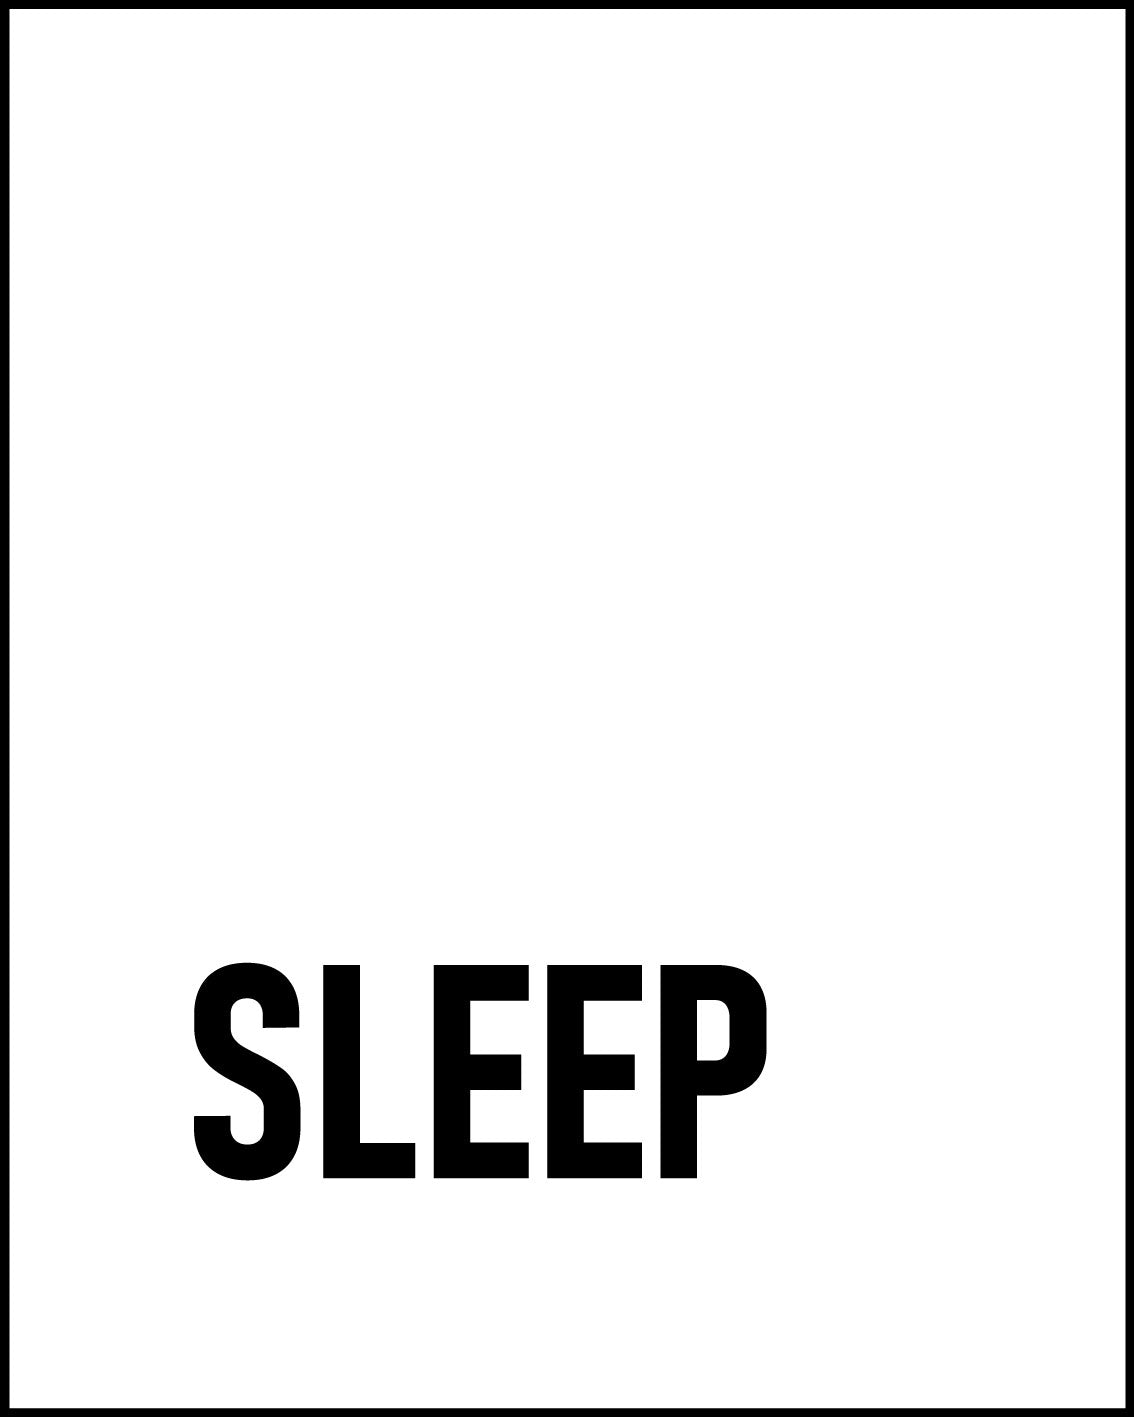 But First Sleep Posters